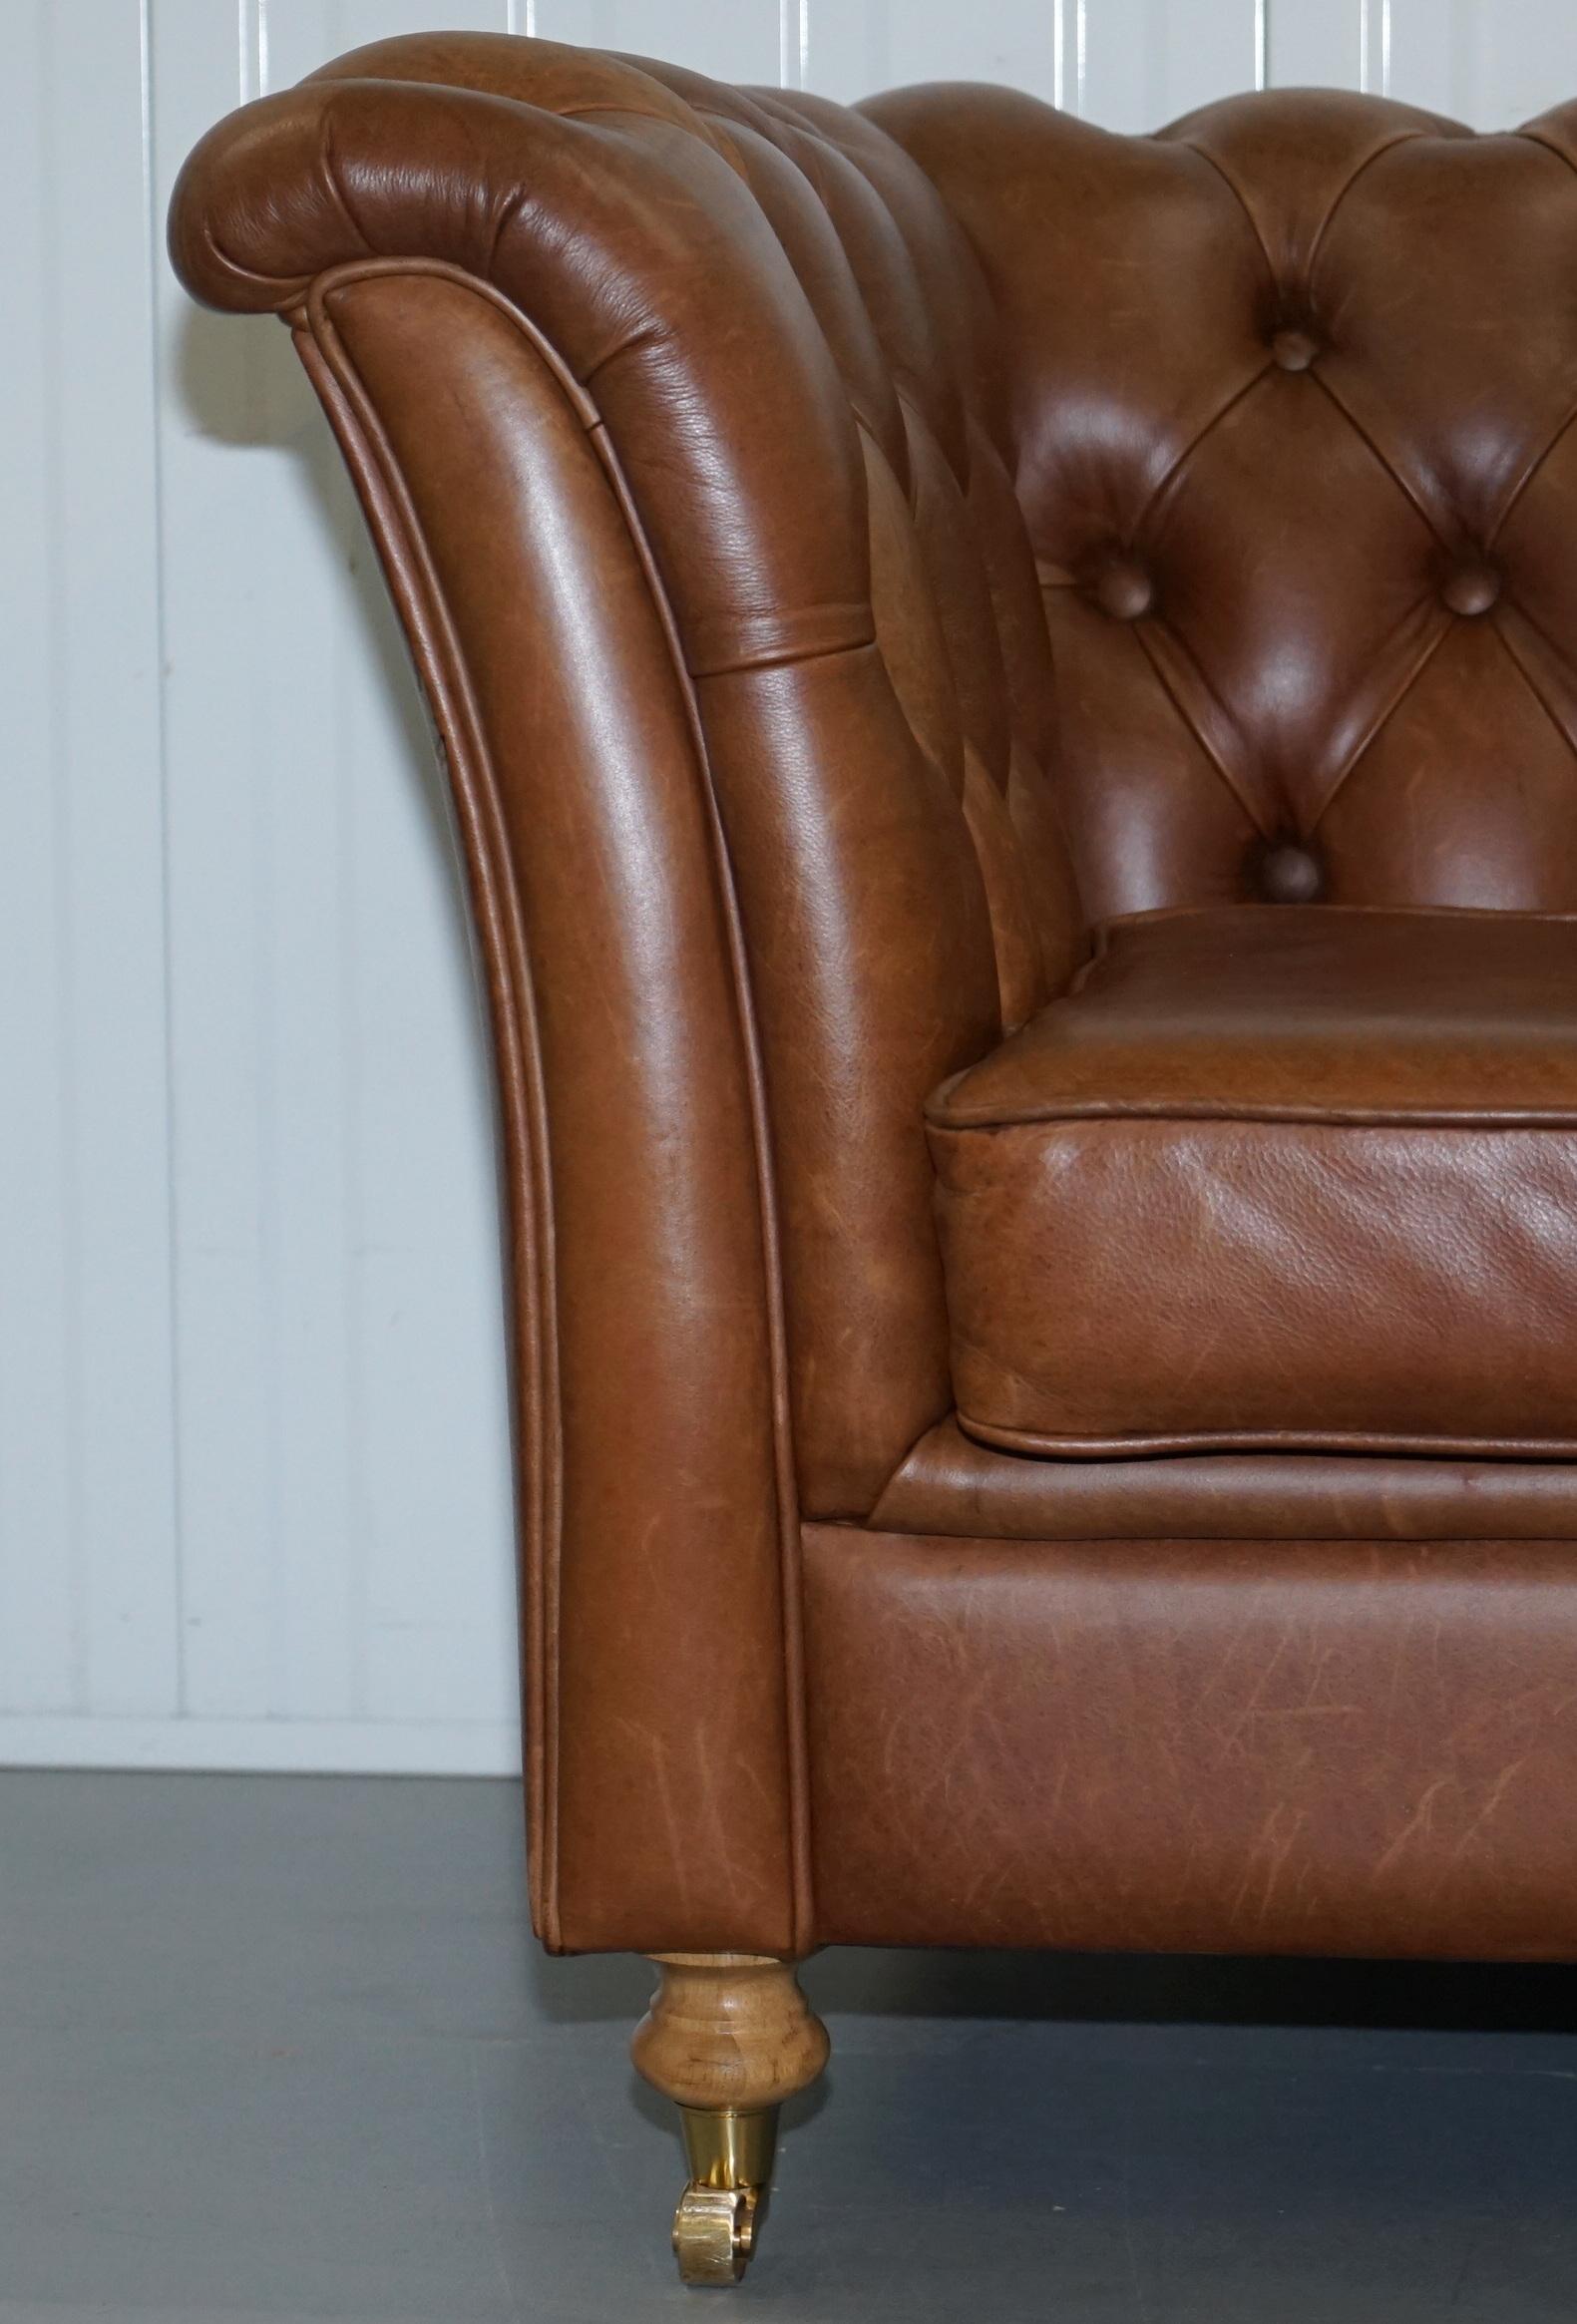 Contemporary Chestnut Brown Leather Chesterfield Sofa with Turned Oak Legs and Castors